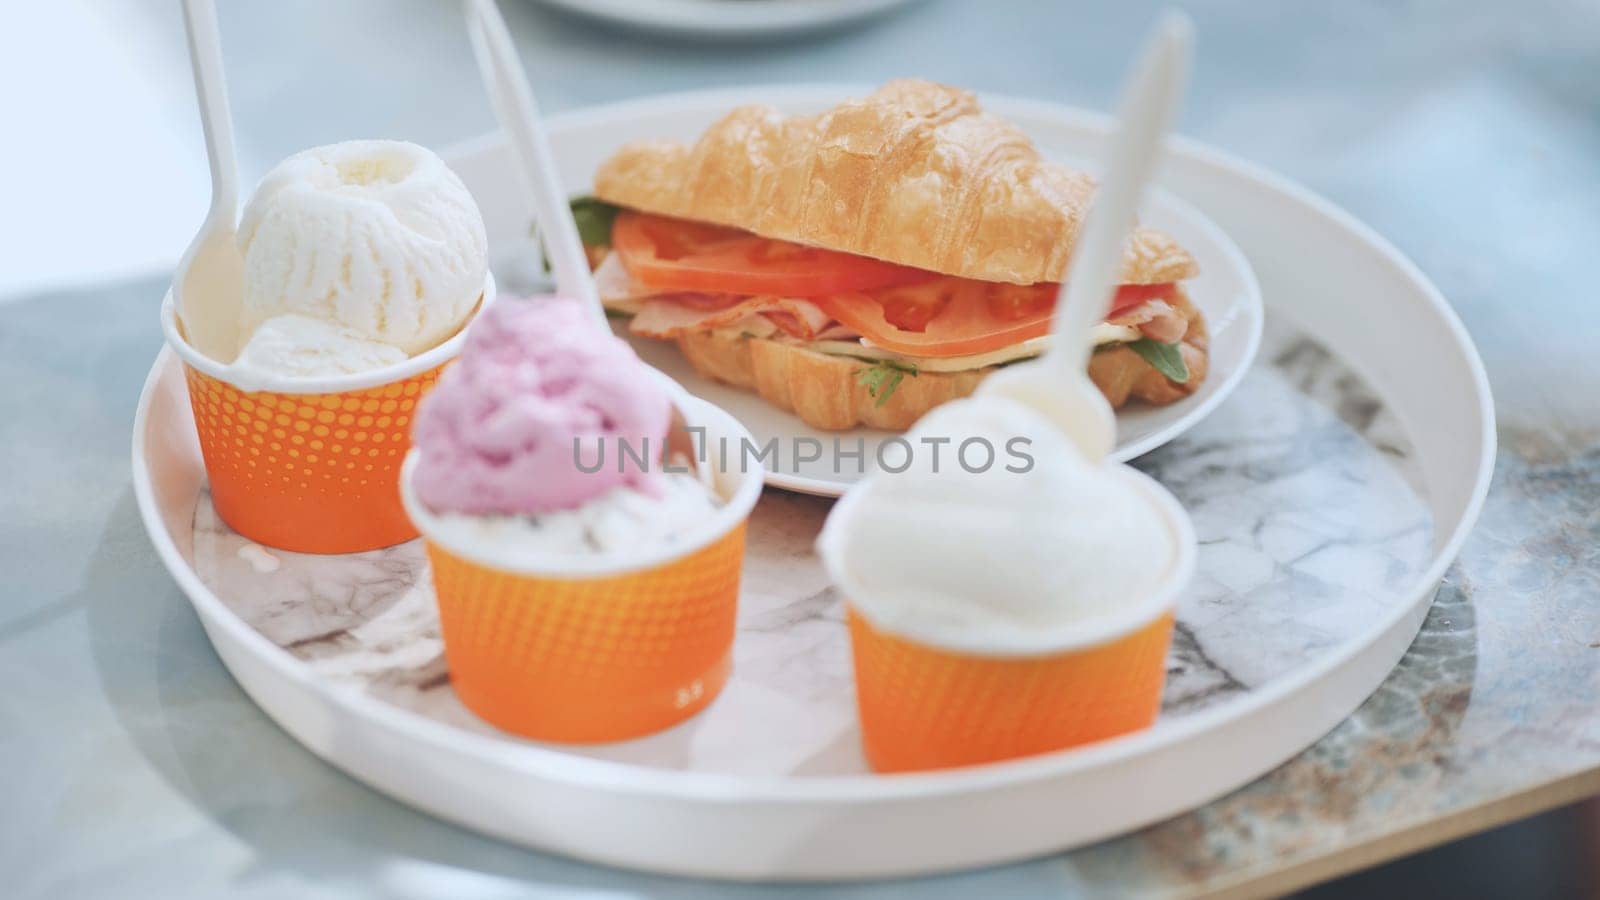 Ice cream and croissant with meat on the plate at the cafe